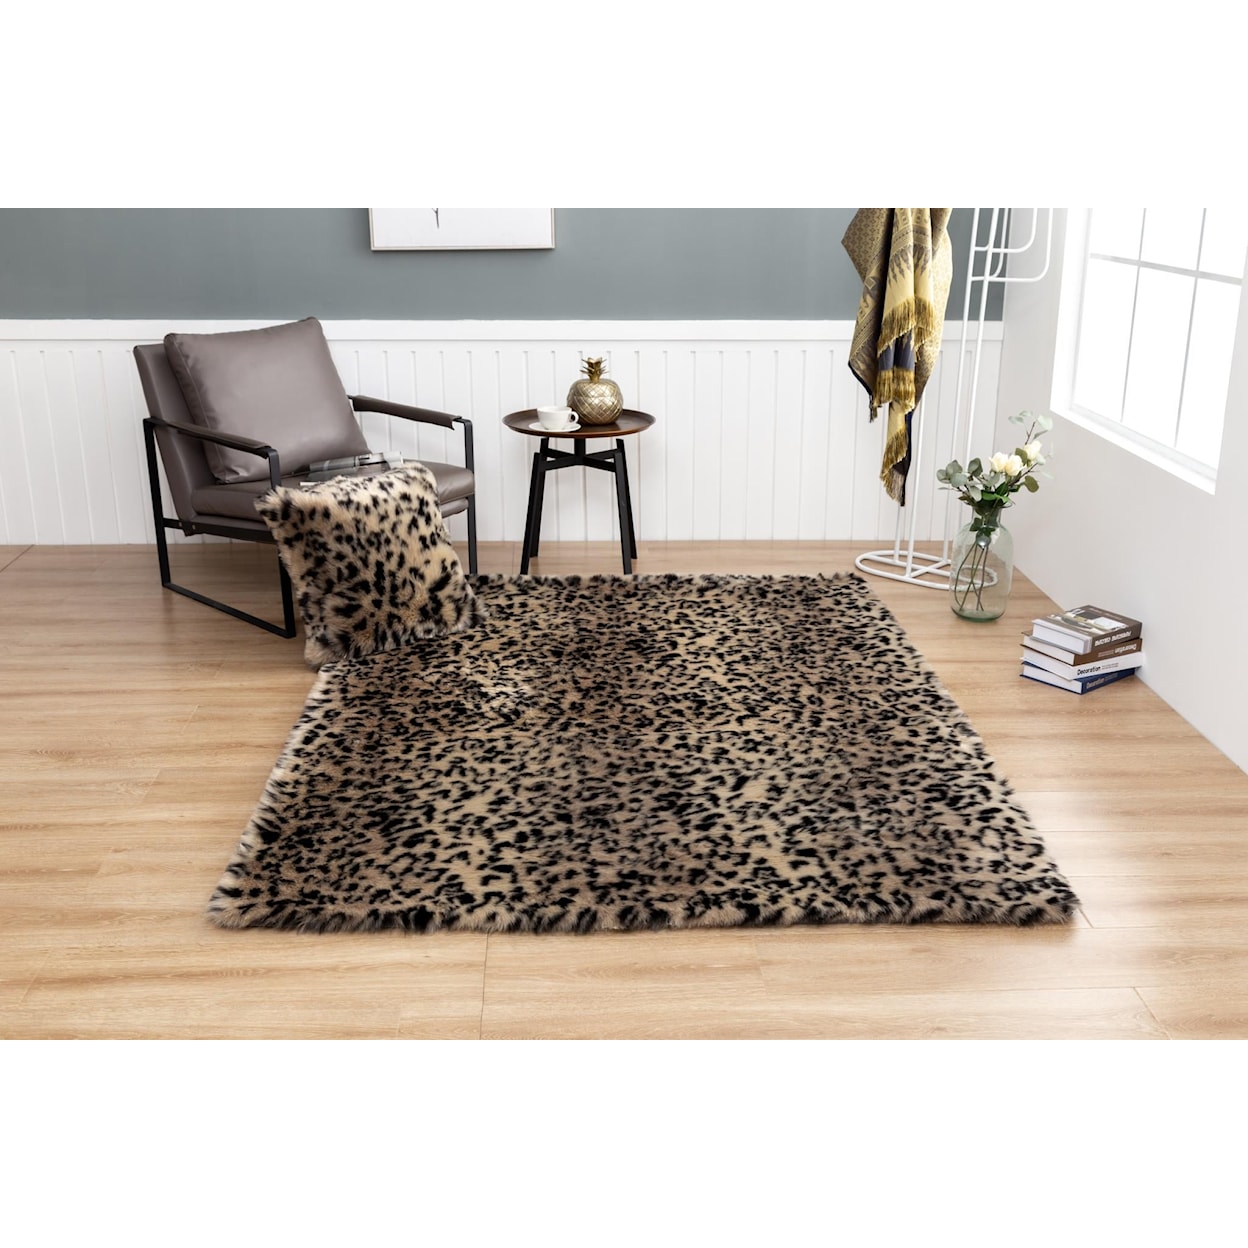 MDA Rugs Luxury Collection LUXURY 5X7 FAUX LEOPARD AREA RUG |